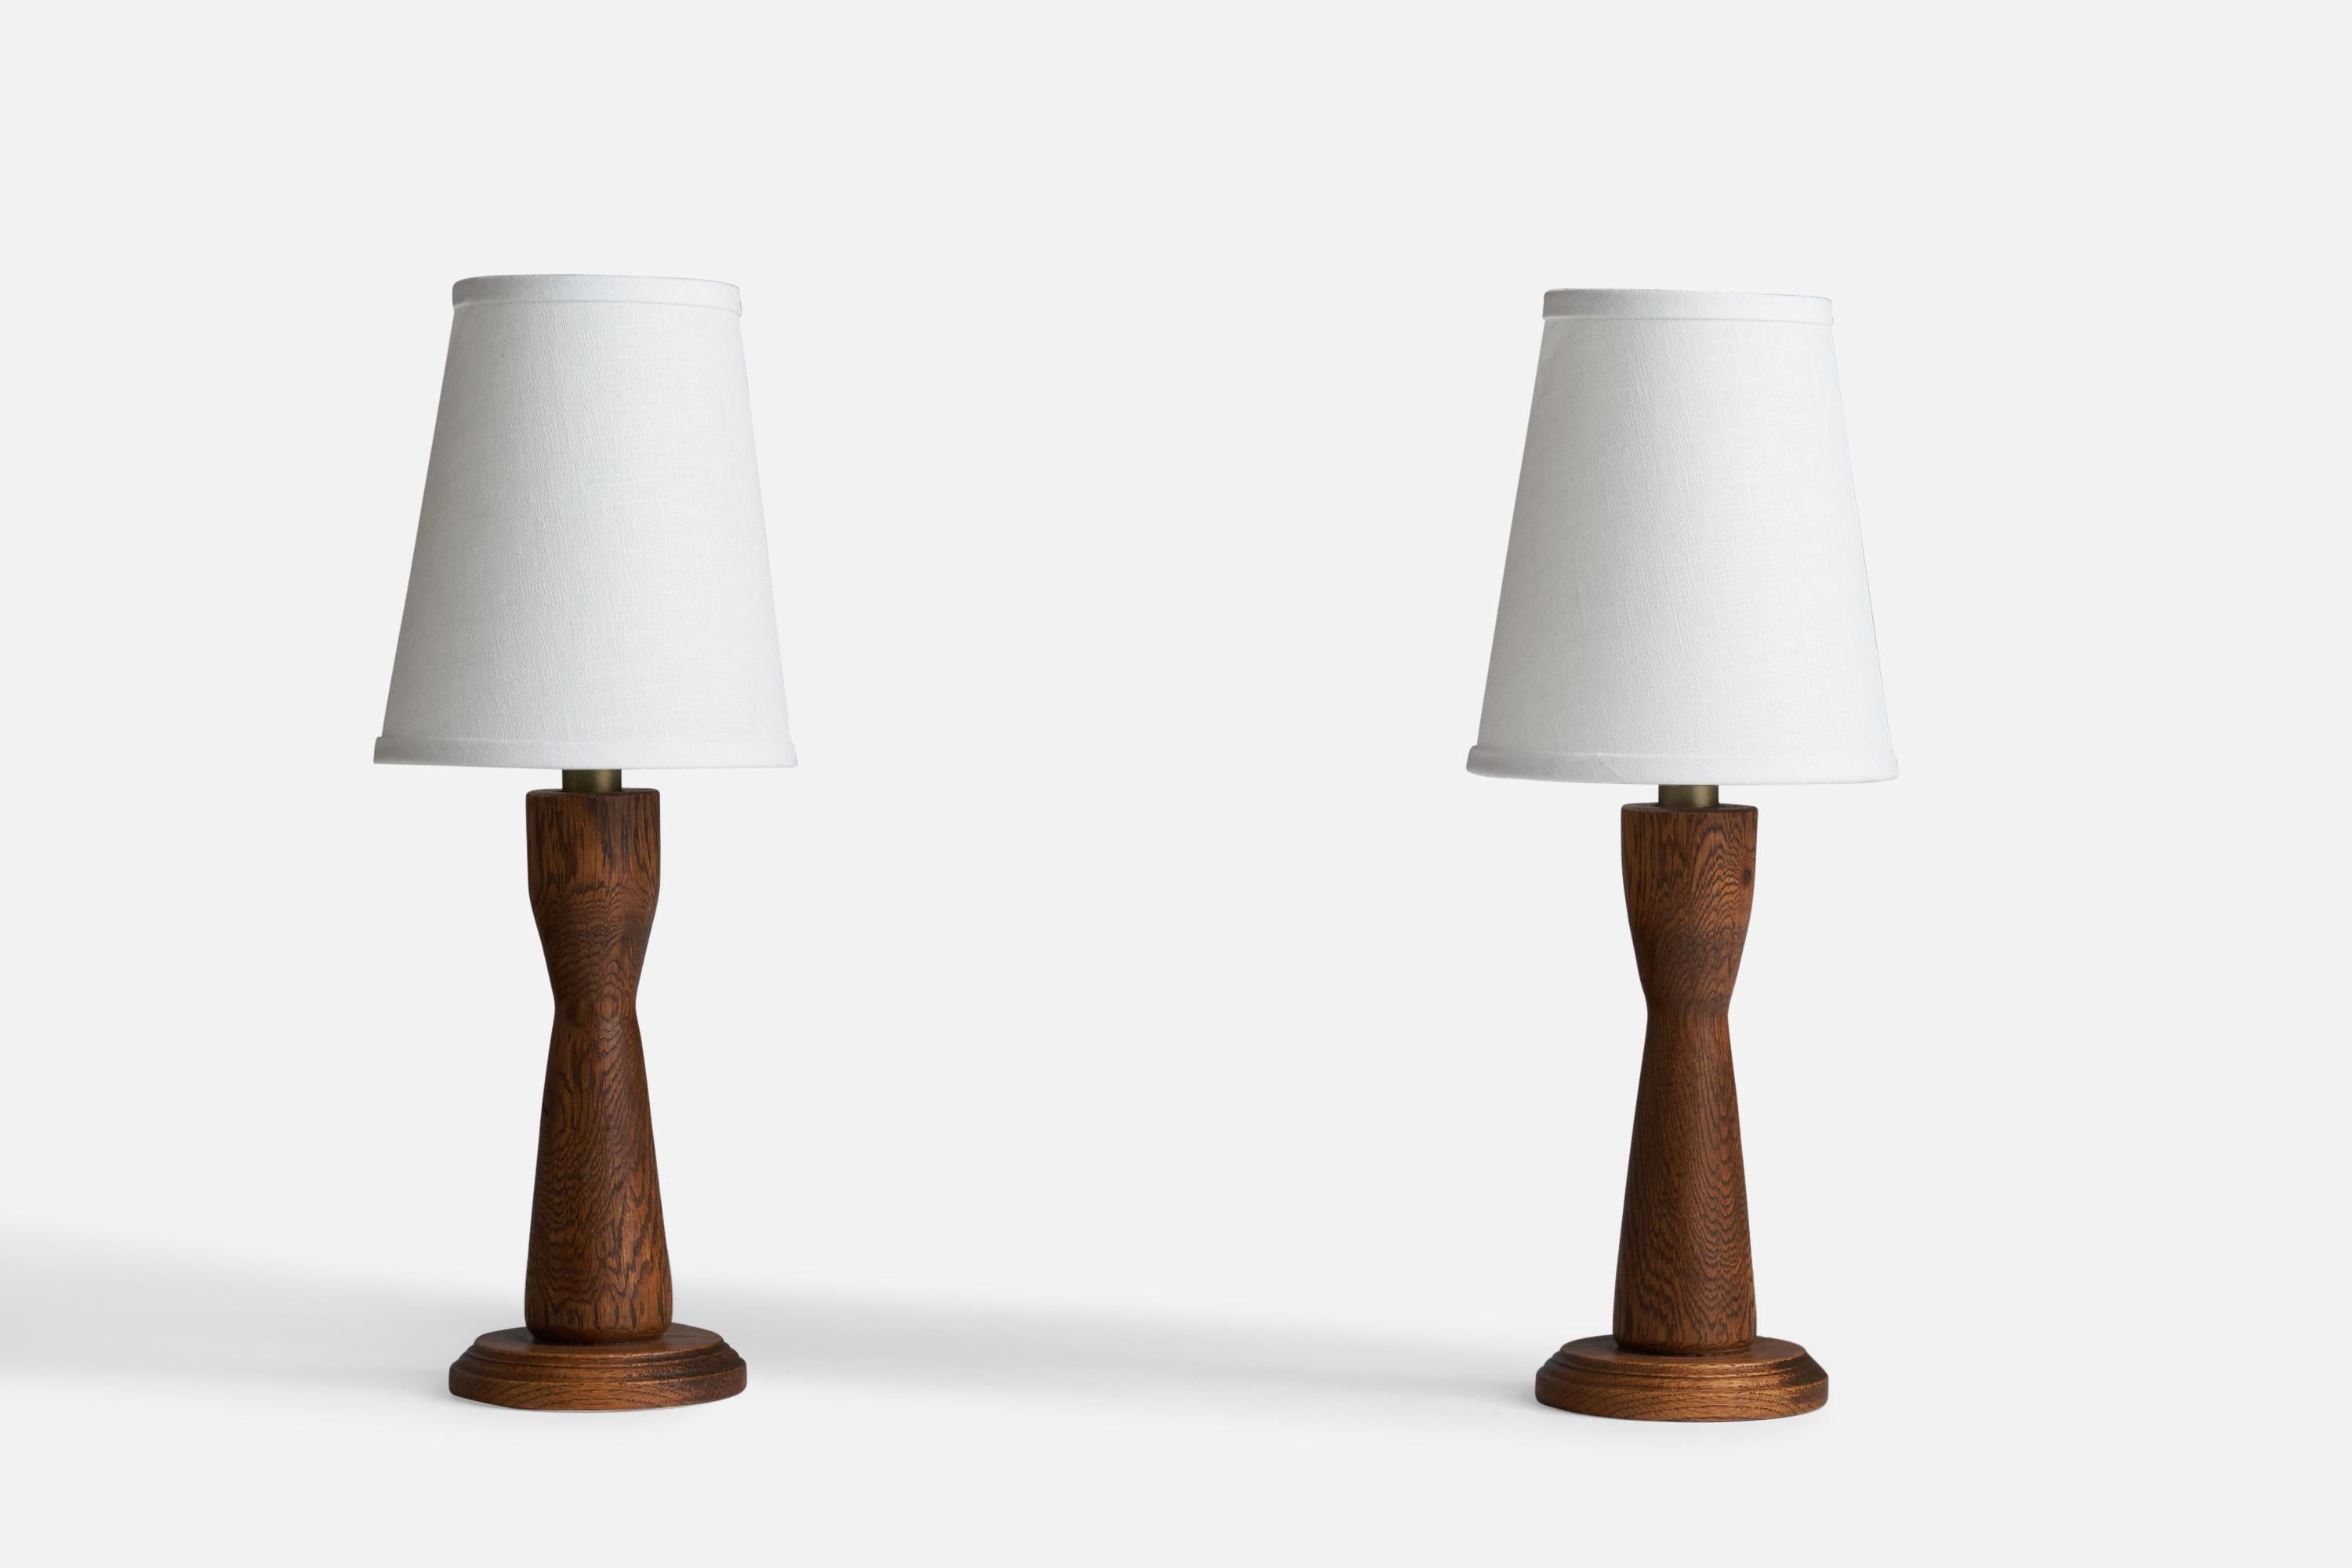 A pair of dark-stained oak and brass table lamps designed and produced in the US, 1950s.

Dimensions of Lamp (inches): 10.25” H x 4.25”  Diameter
Dimensions of Shade (inches): 4”  Top Diameter x 6”  Bottom Diameter x 7” H
Dimensions of Lamp with